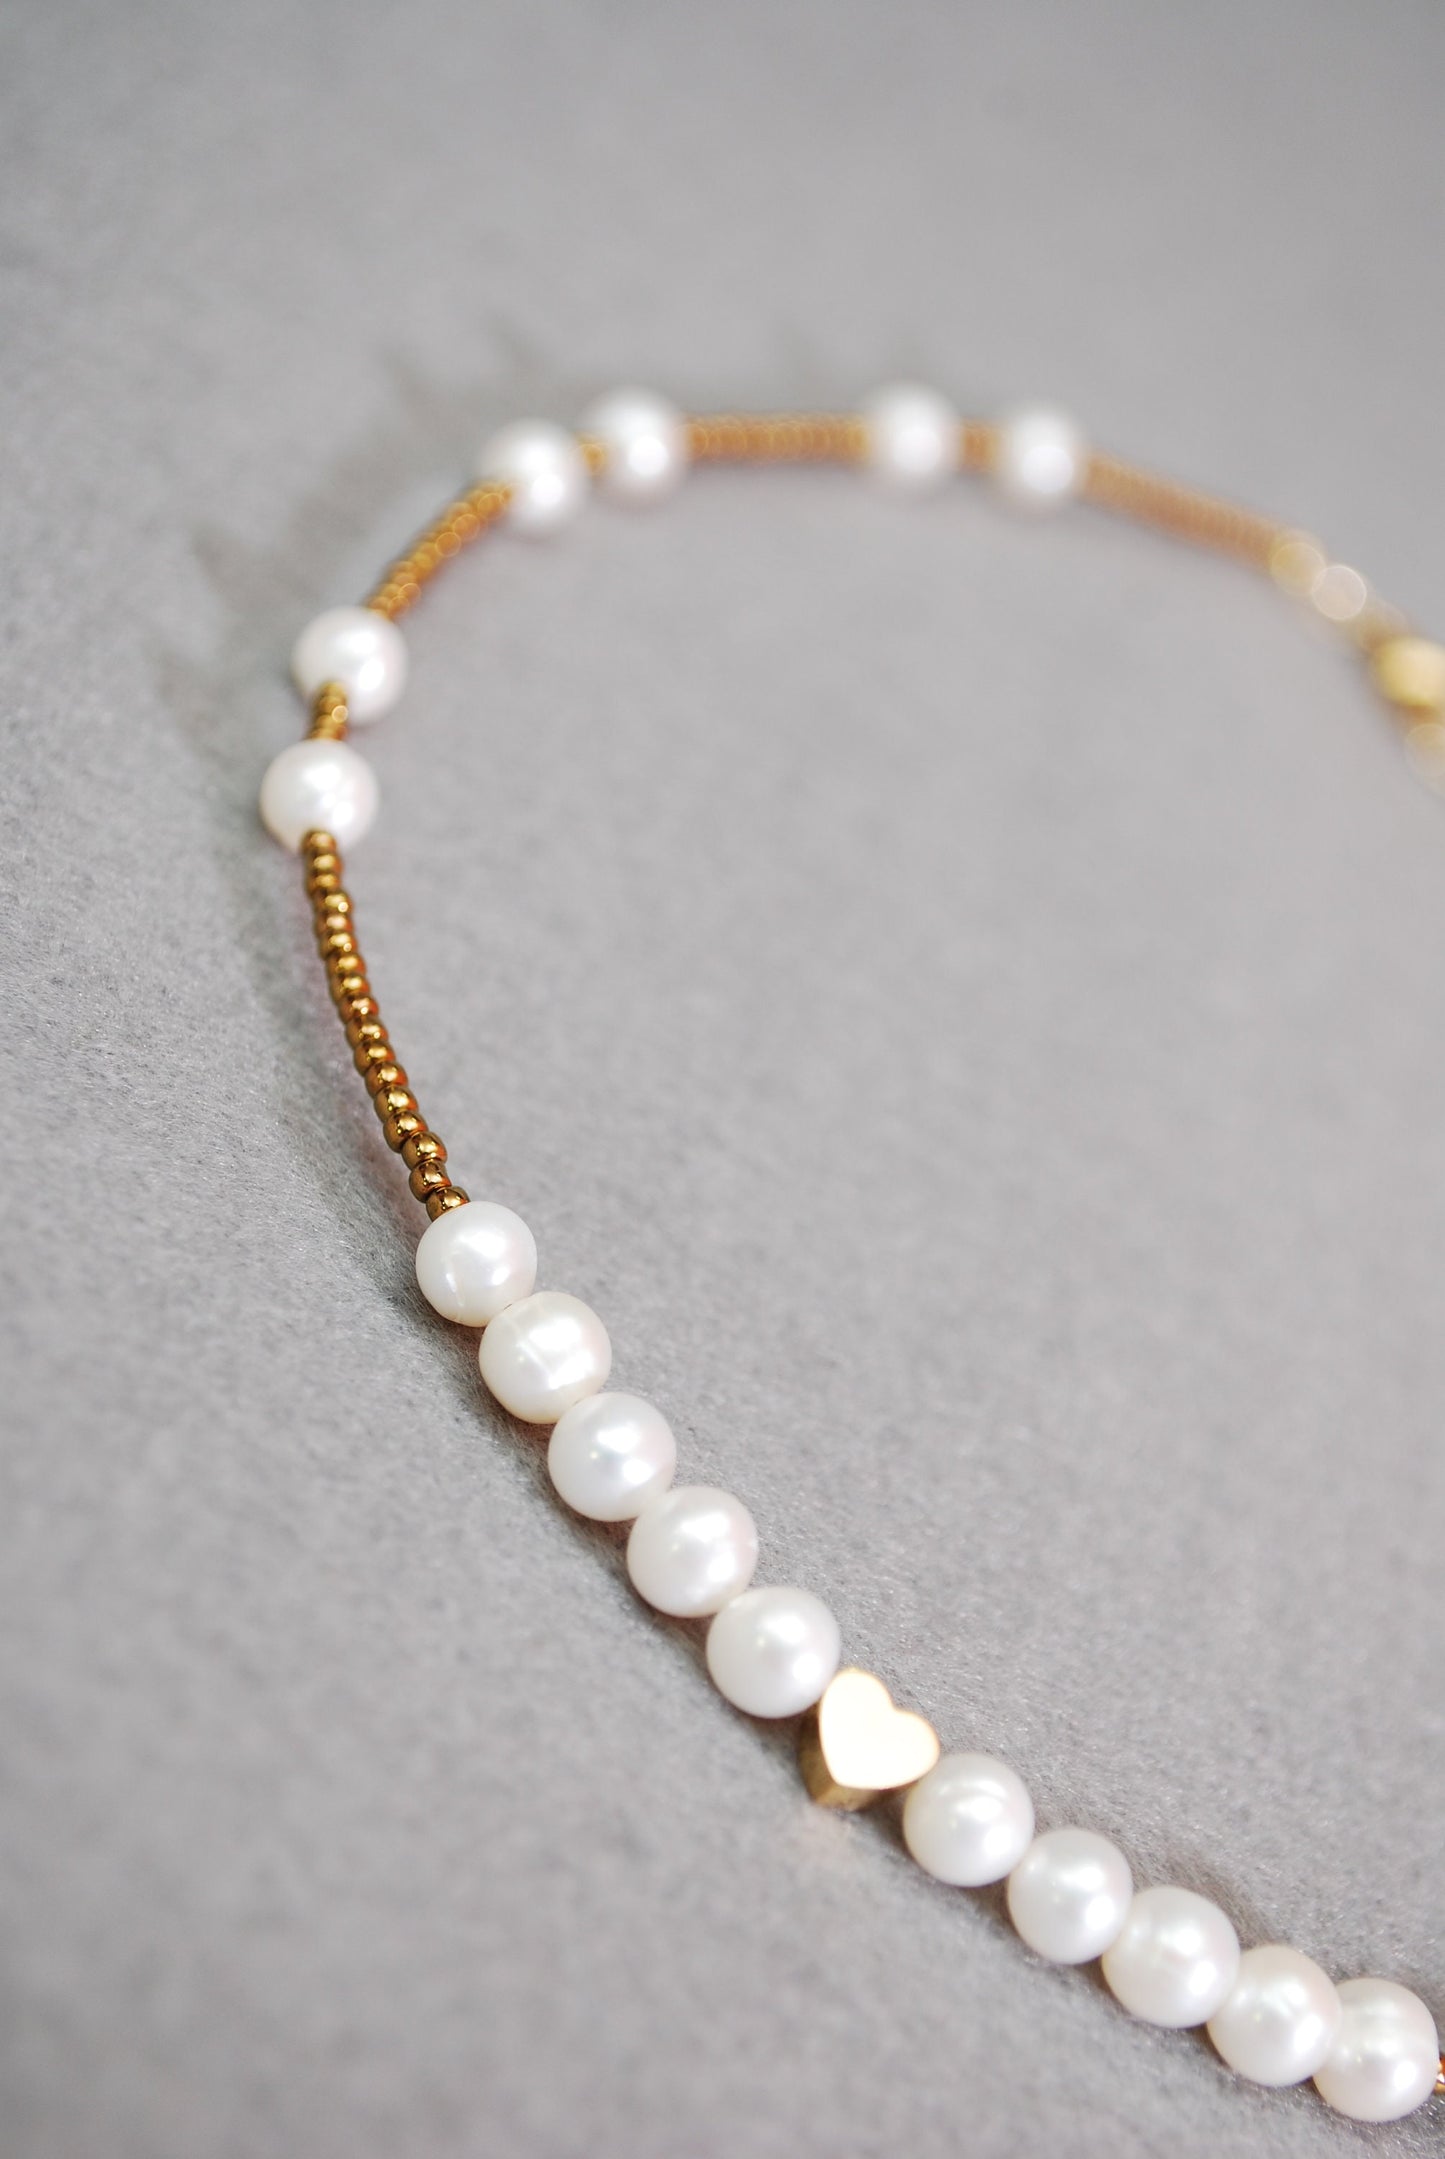 Trendy Freshwater Pearls Choker with Gold Heart Charm - Custom Handmade Necklace for Women's Boho-Chic and Minimalist Style